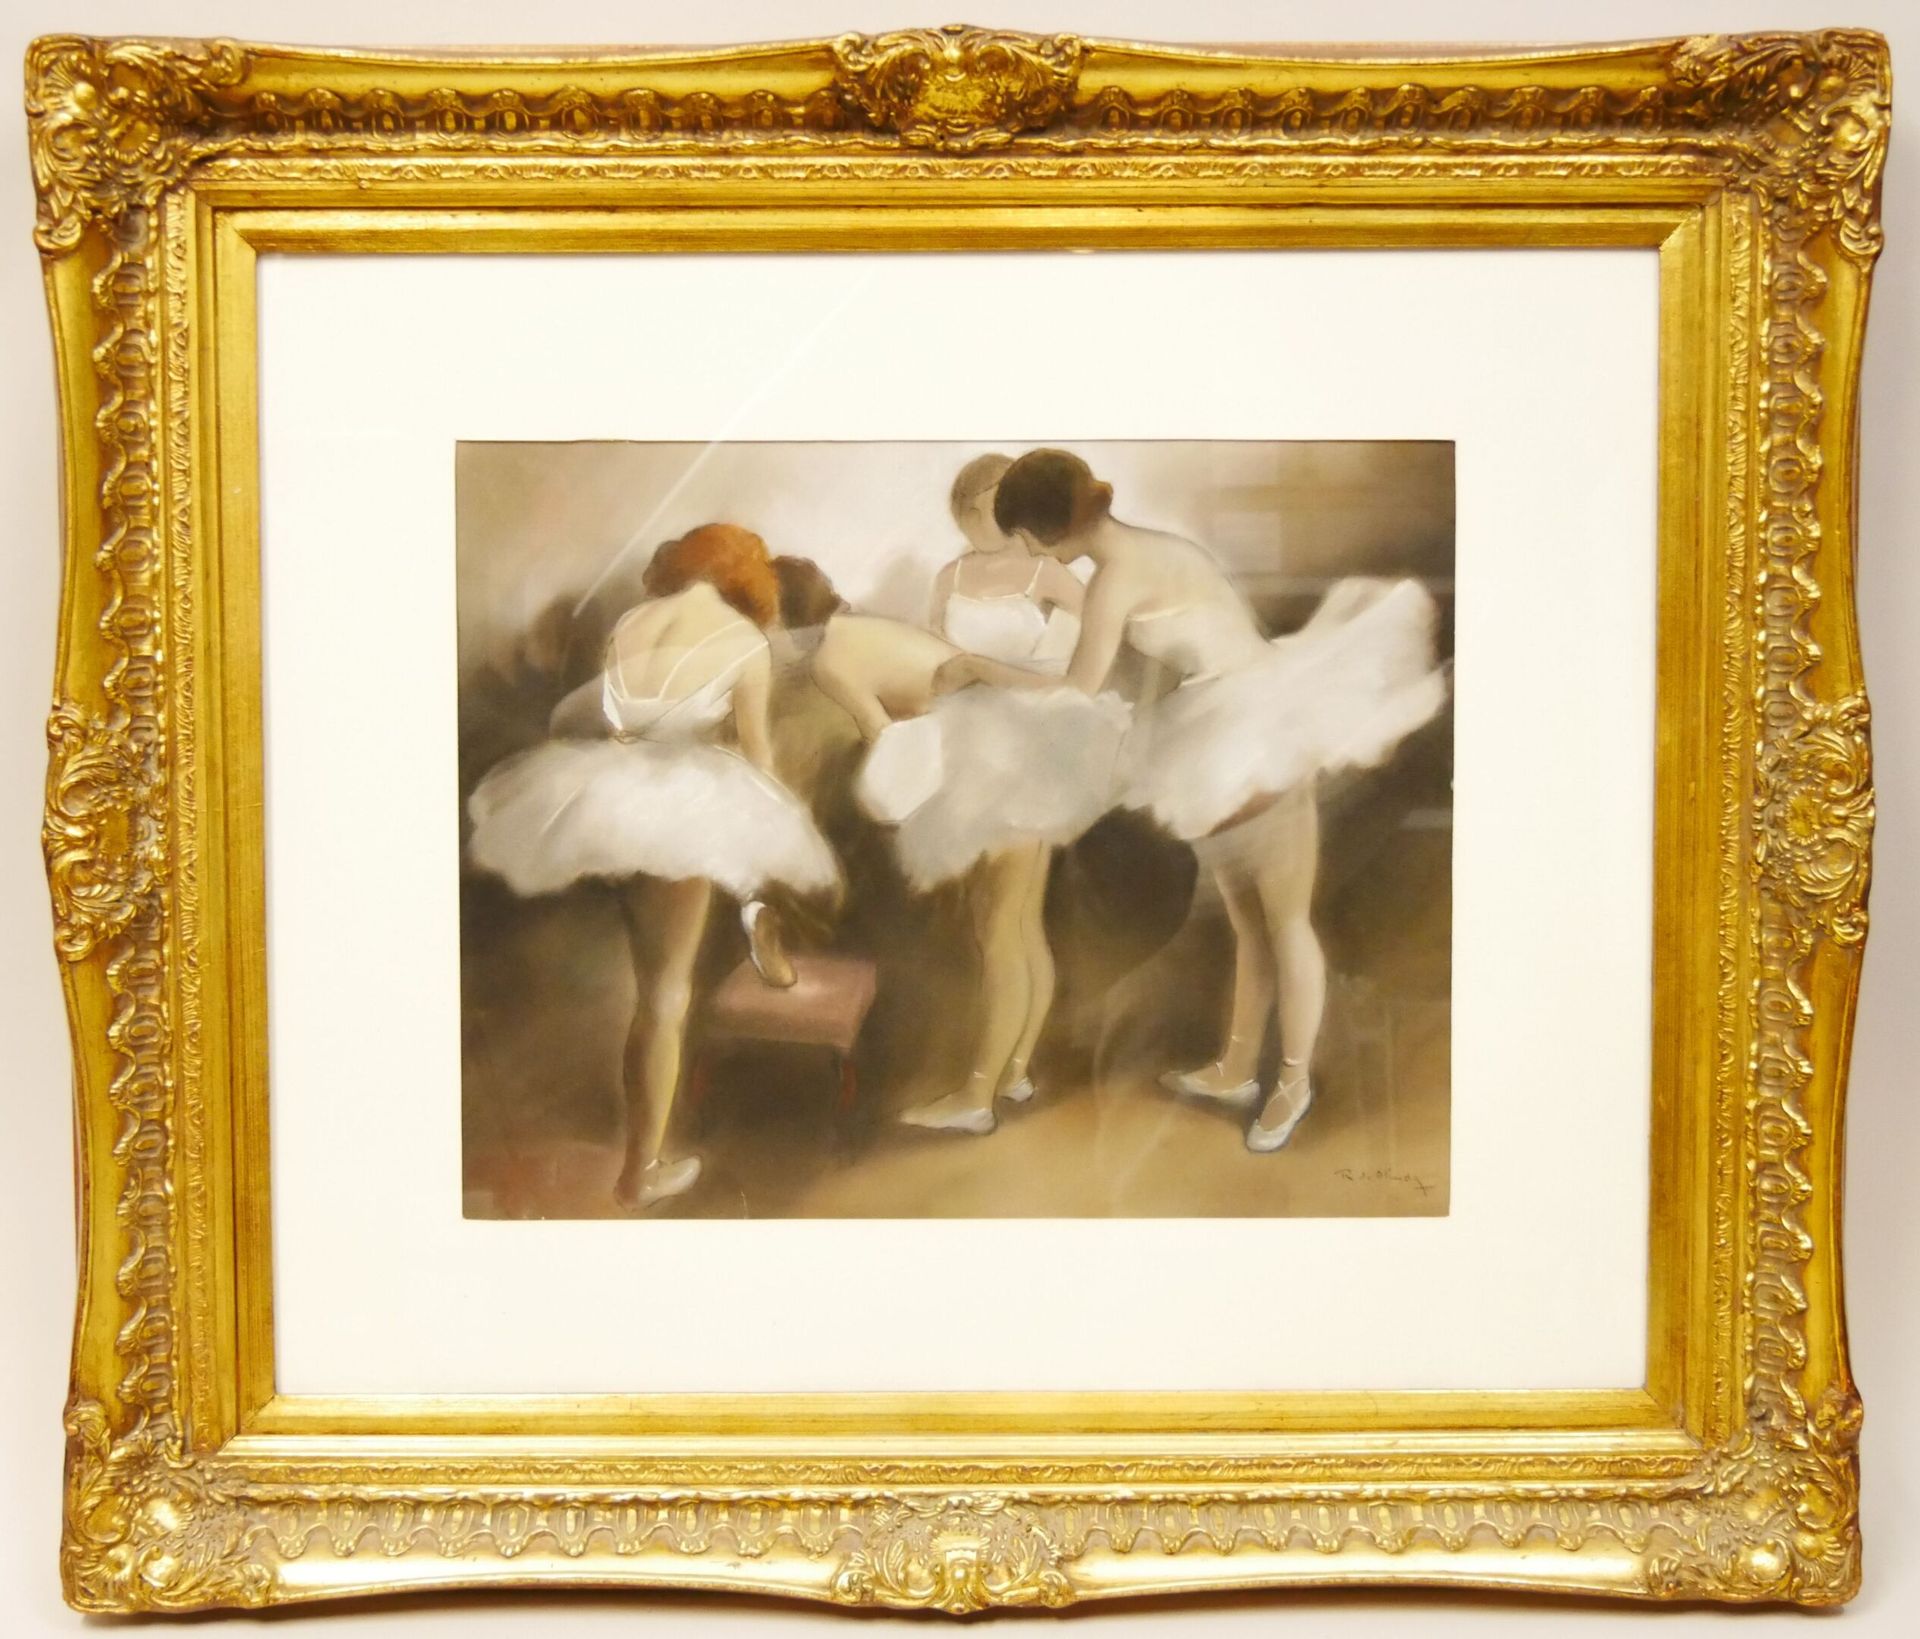 Null René Pierre DE OLINDA (1893-?)

The dancers 

Pastel on paper signed on the&hellip;